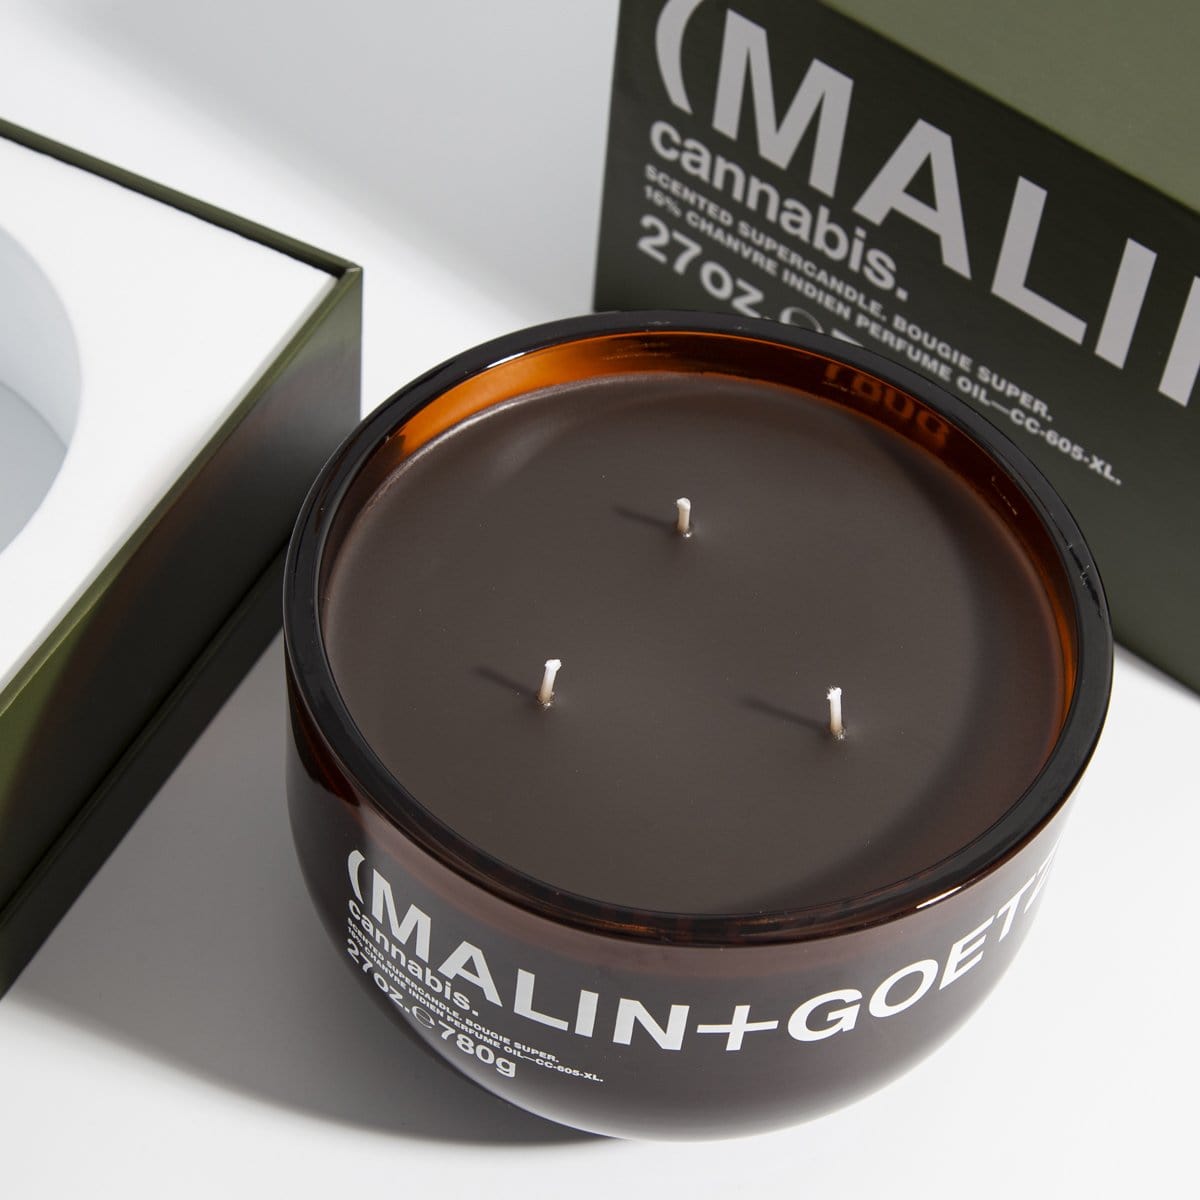 Cannabis Candle (MALIN+GOETZ) Scented Candle